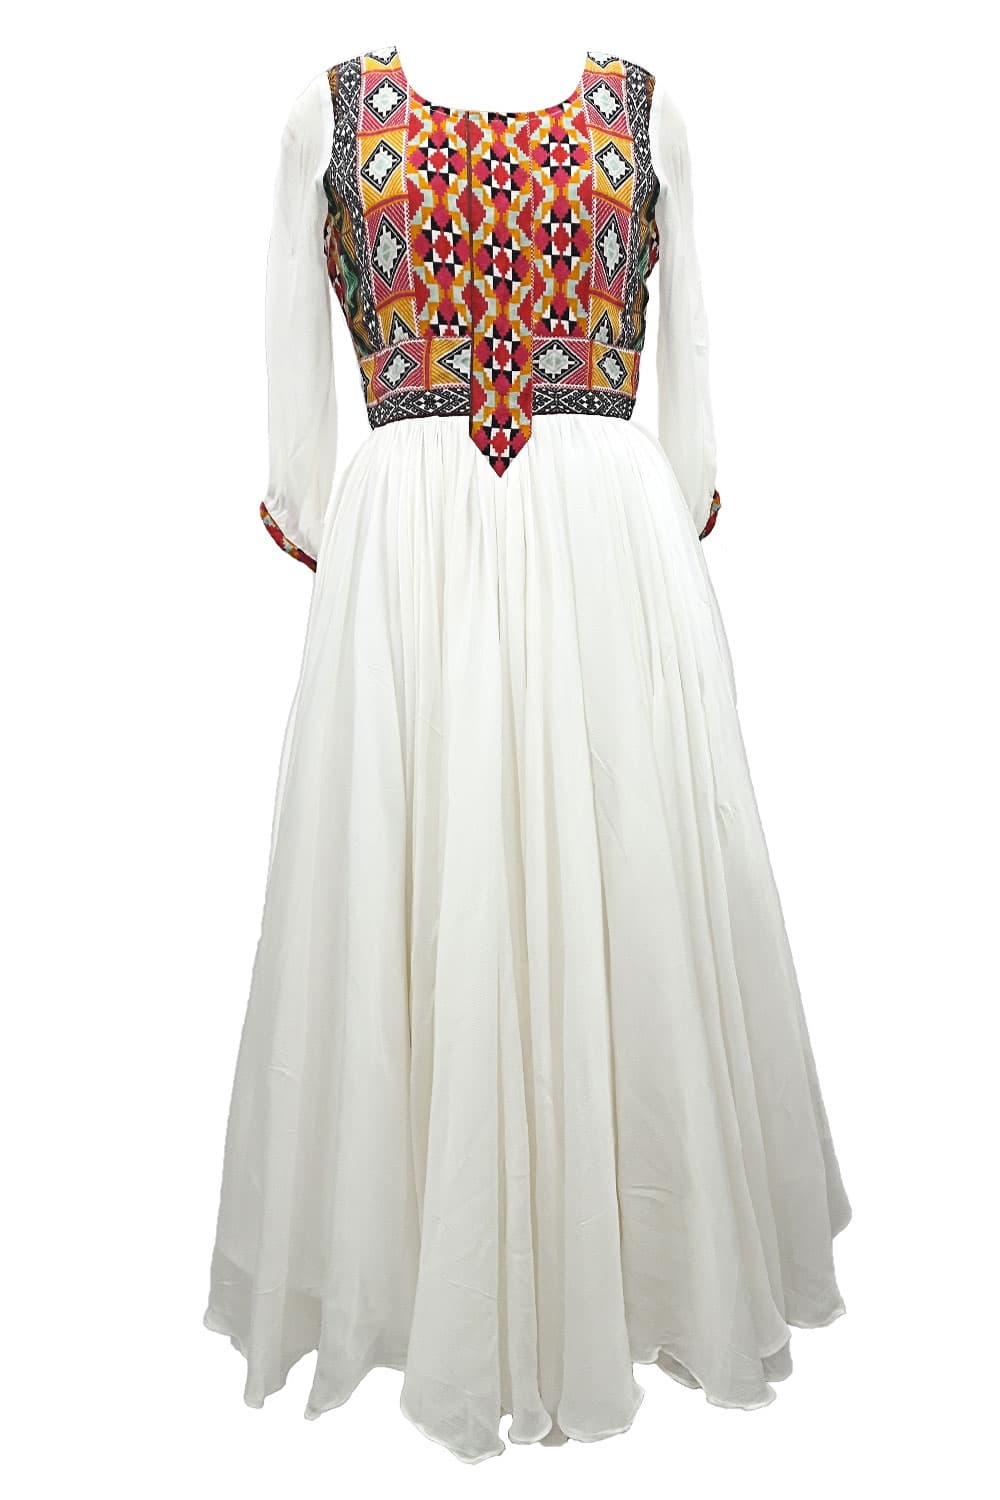 Printed Top with white Flair(12 Mtr) Dress